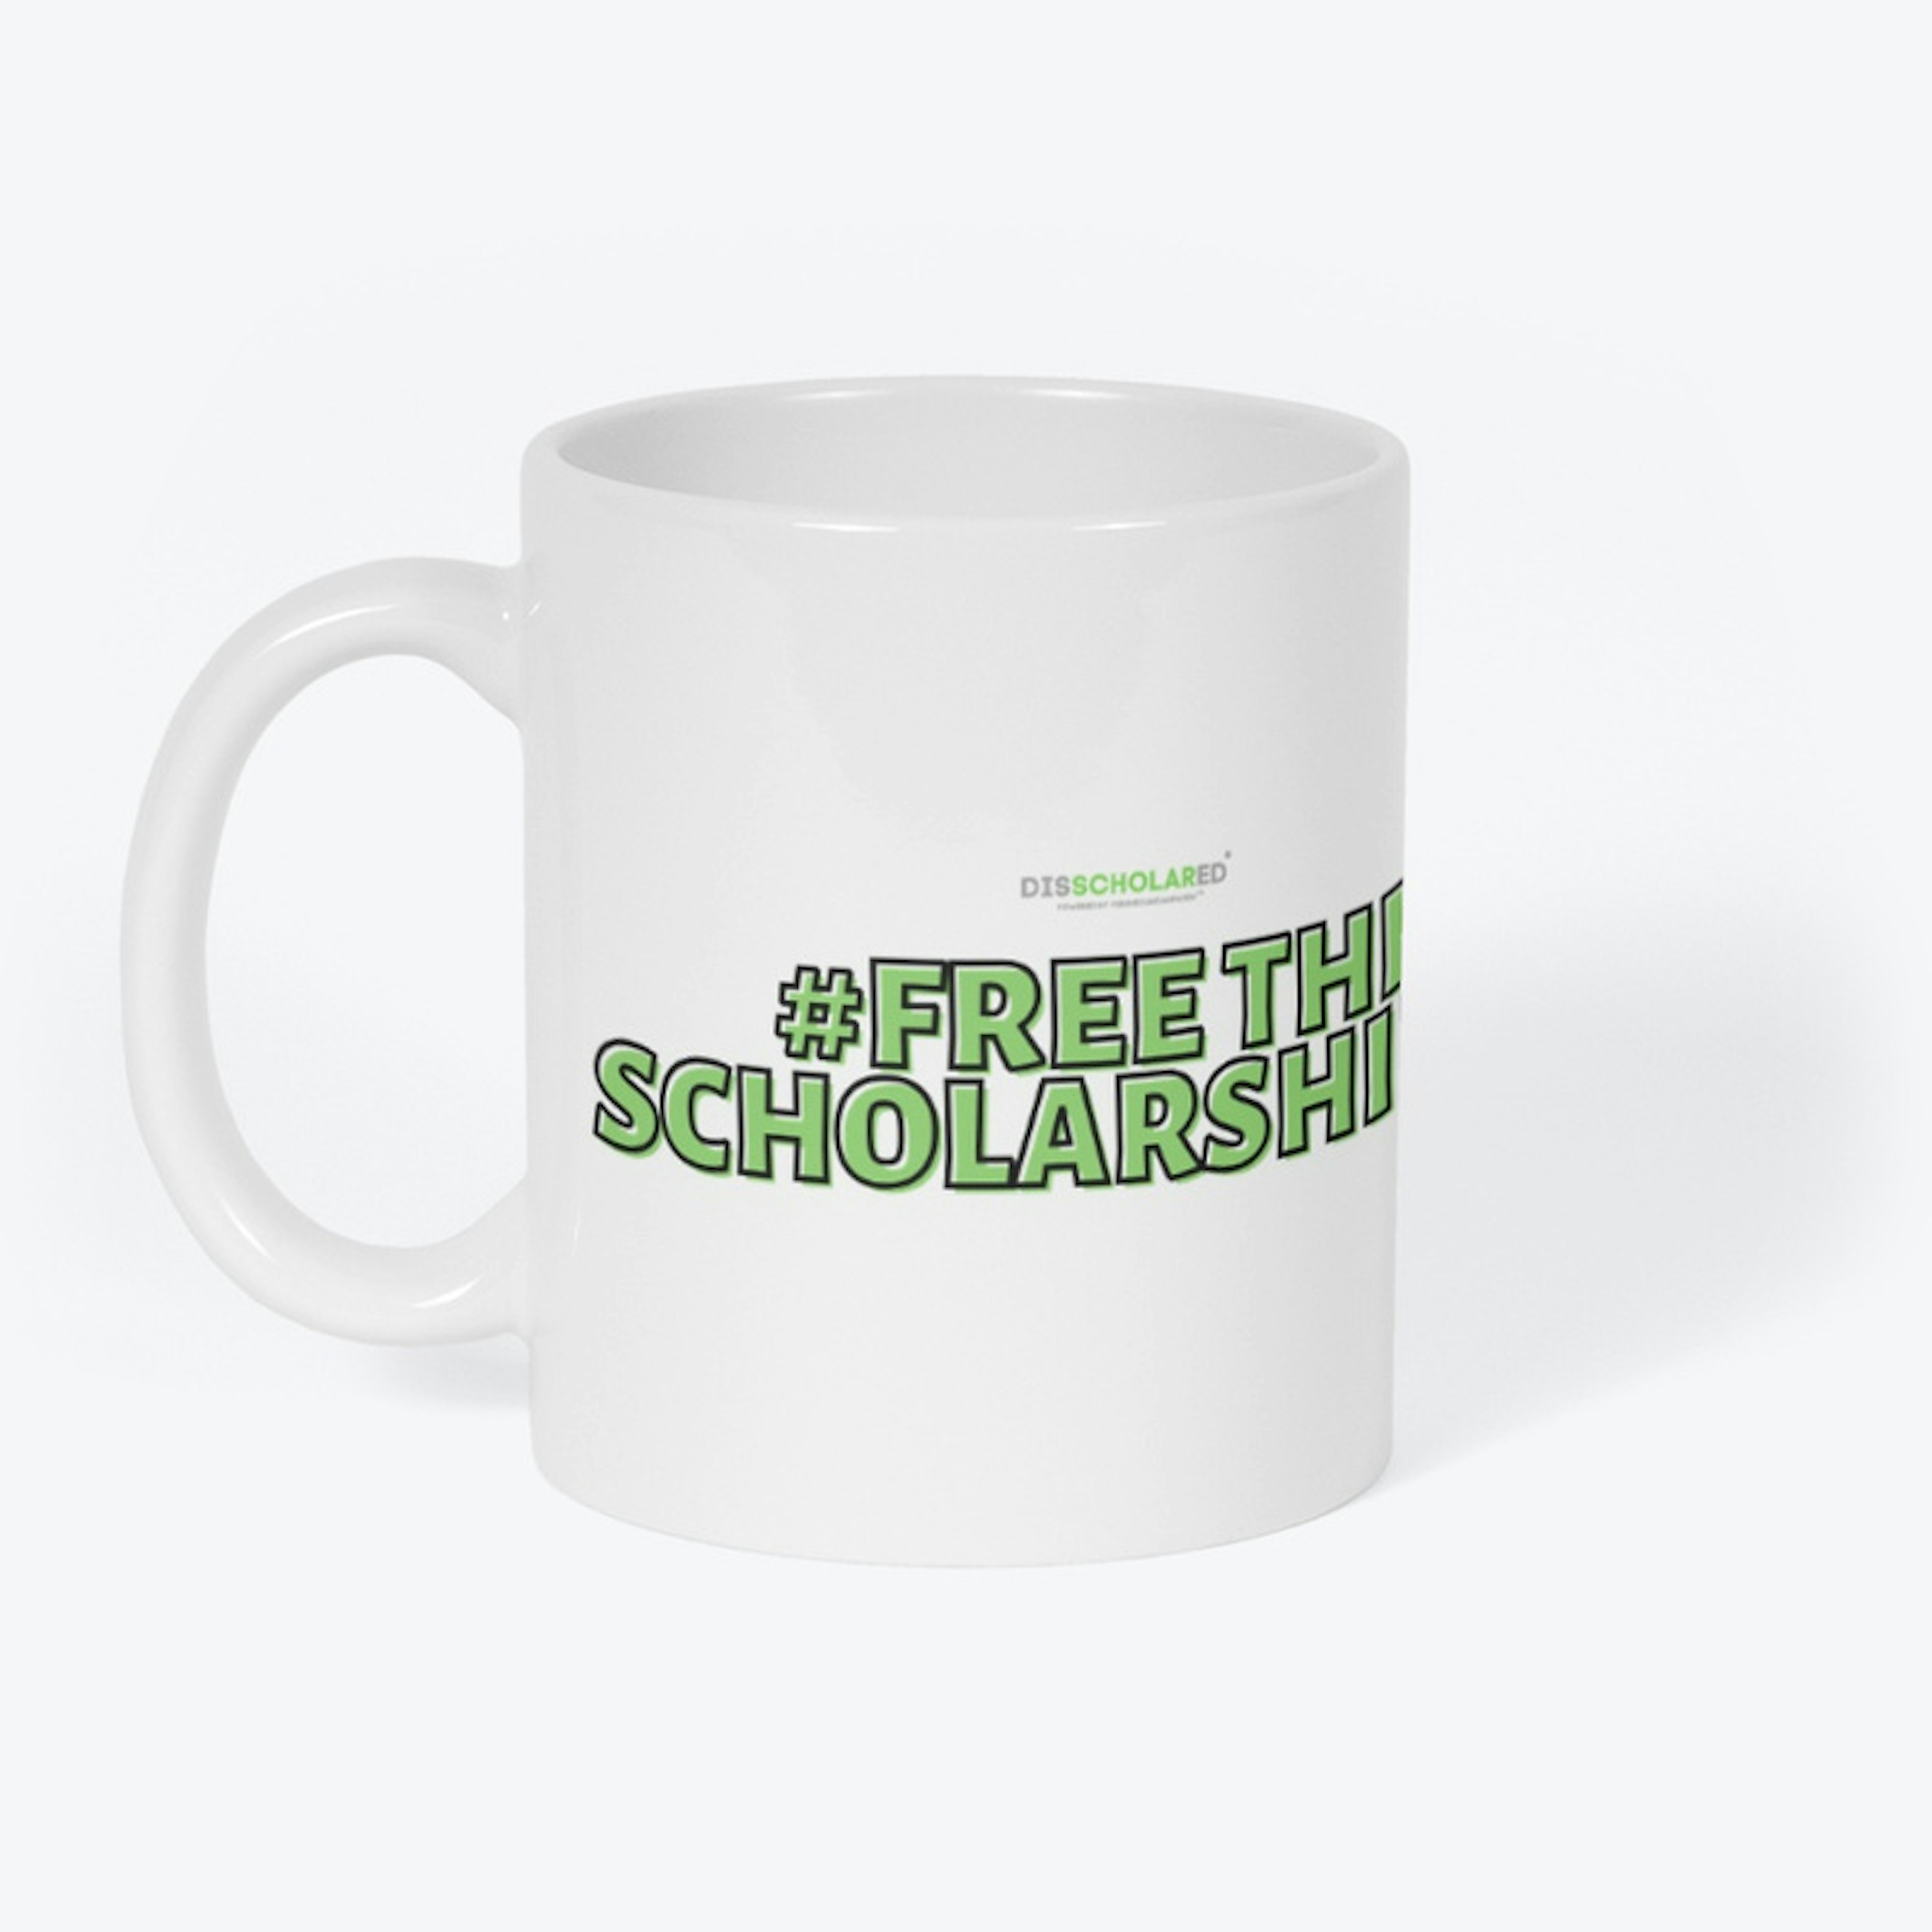 Free the Scholarships™